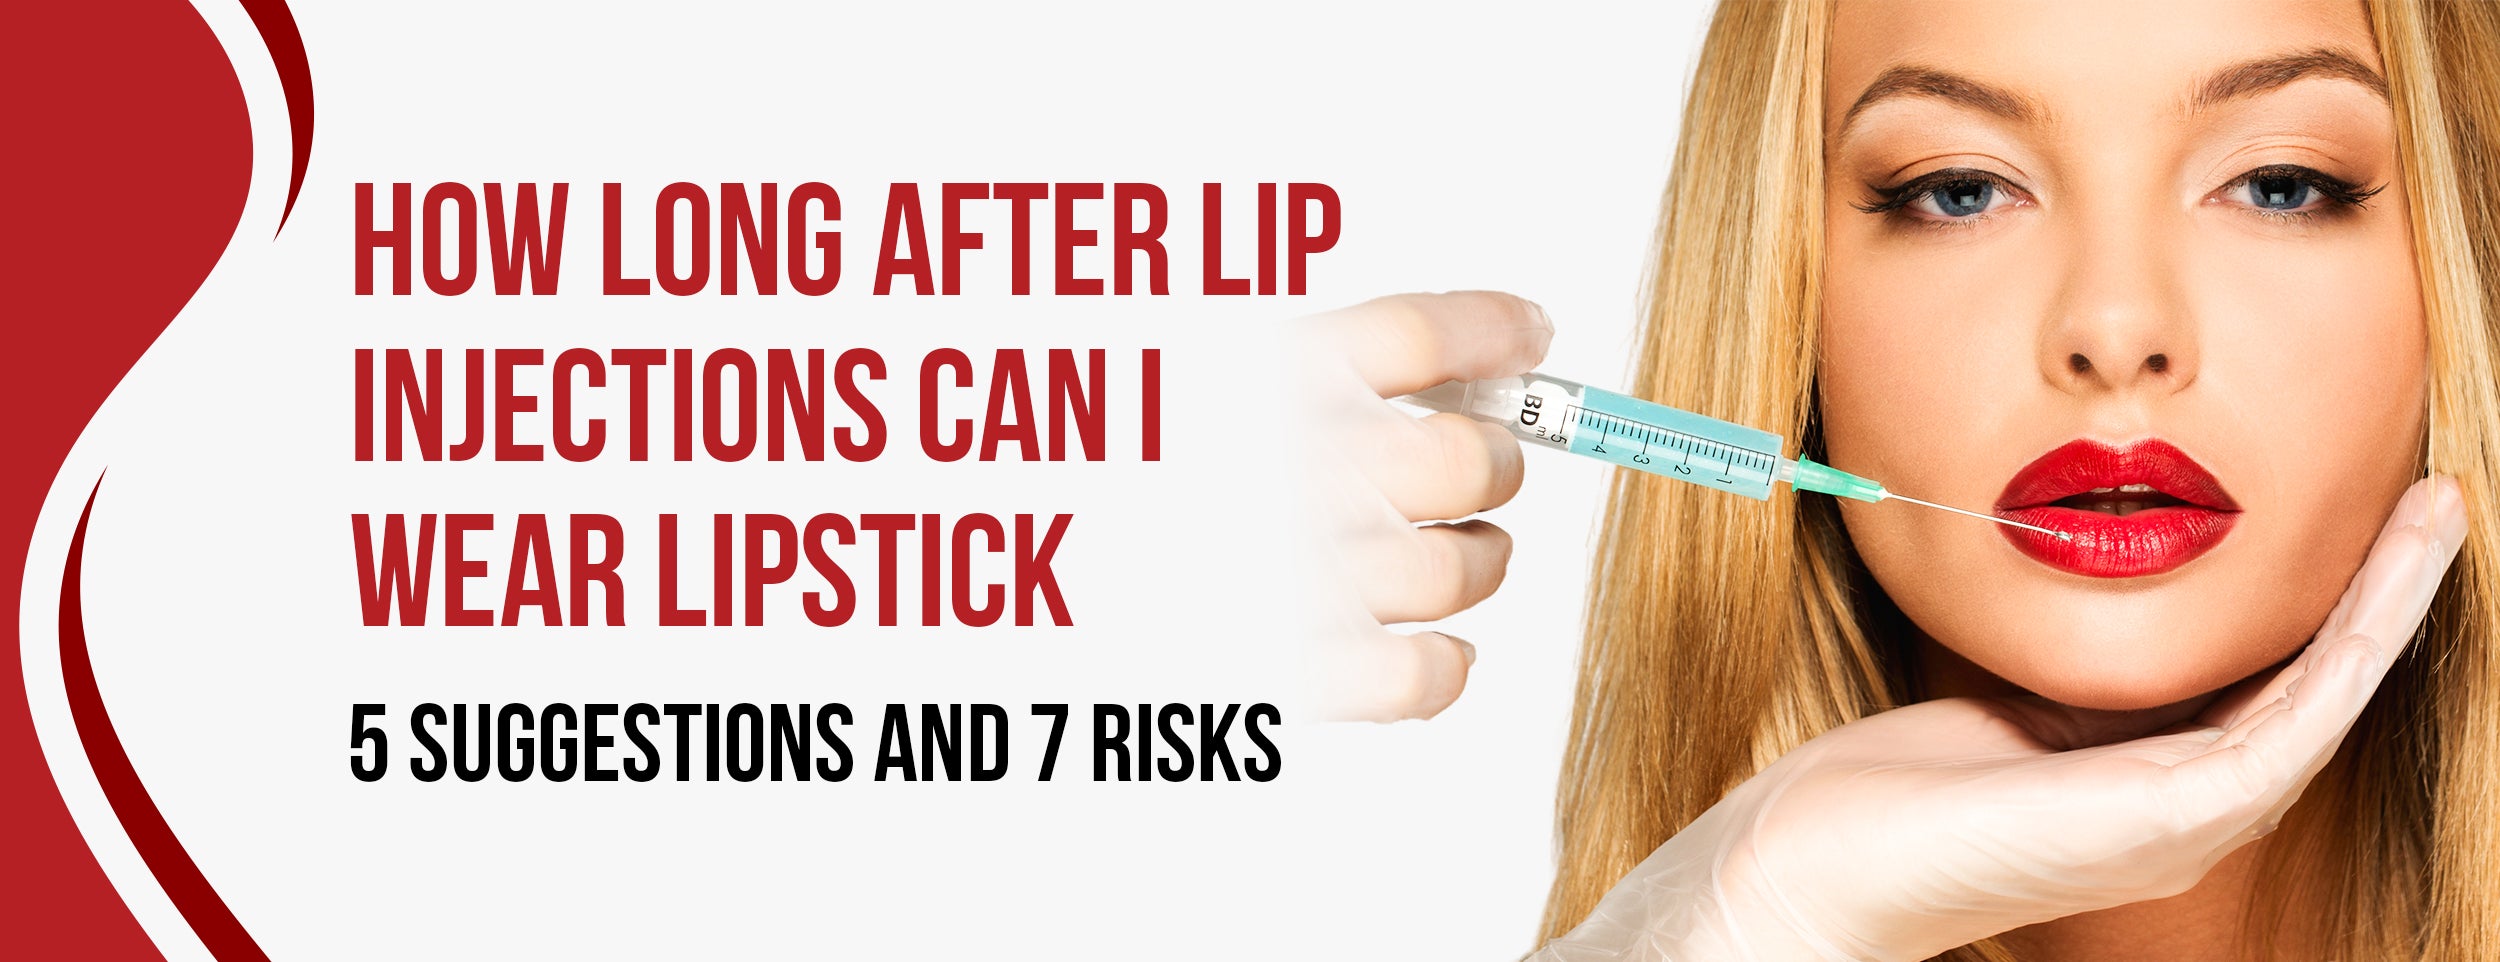 The recommended time and 7 risks of wearing lipstick after lip injections